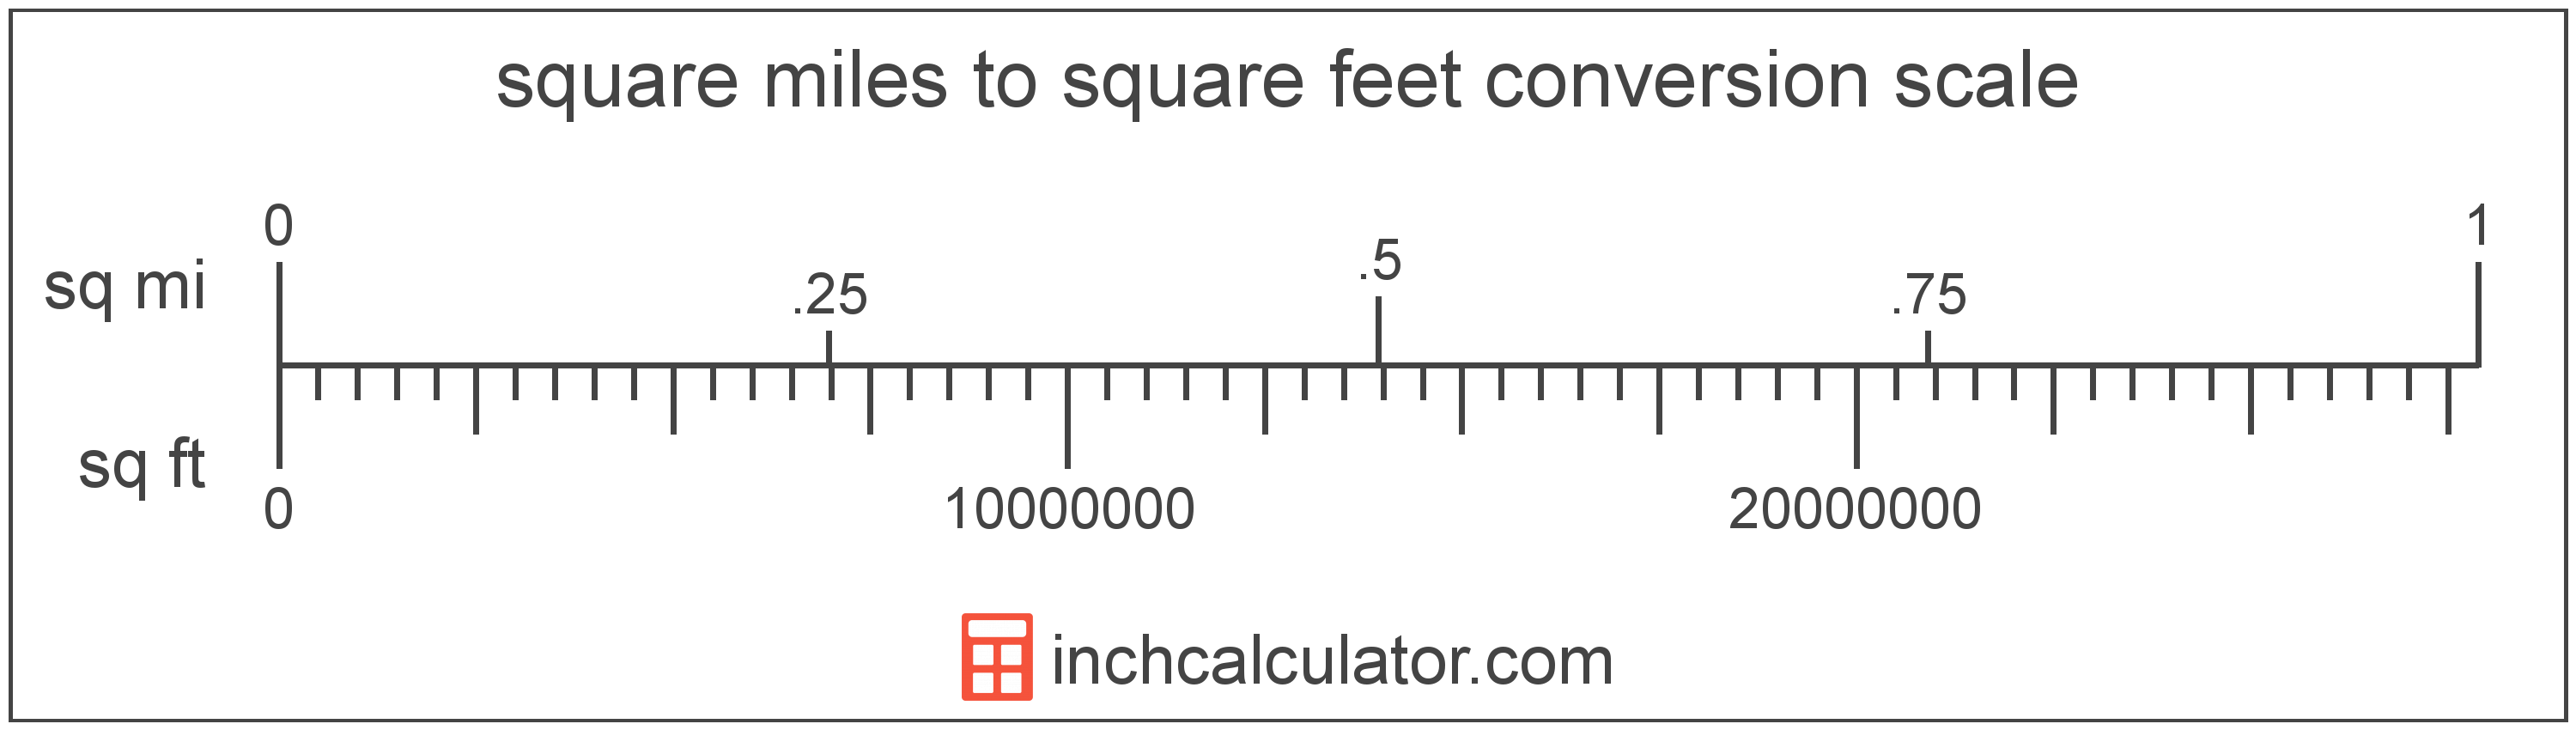 conversion scale showing square feet and equivalent square miles area values